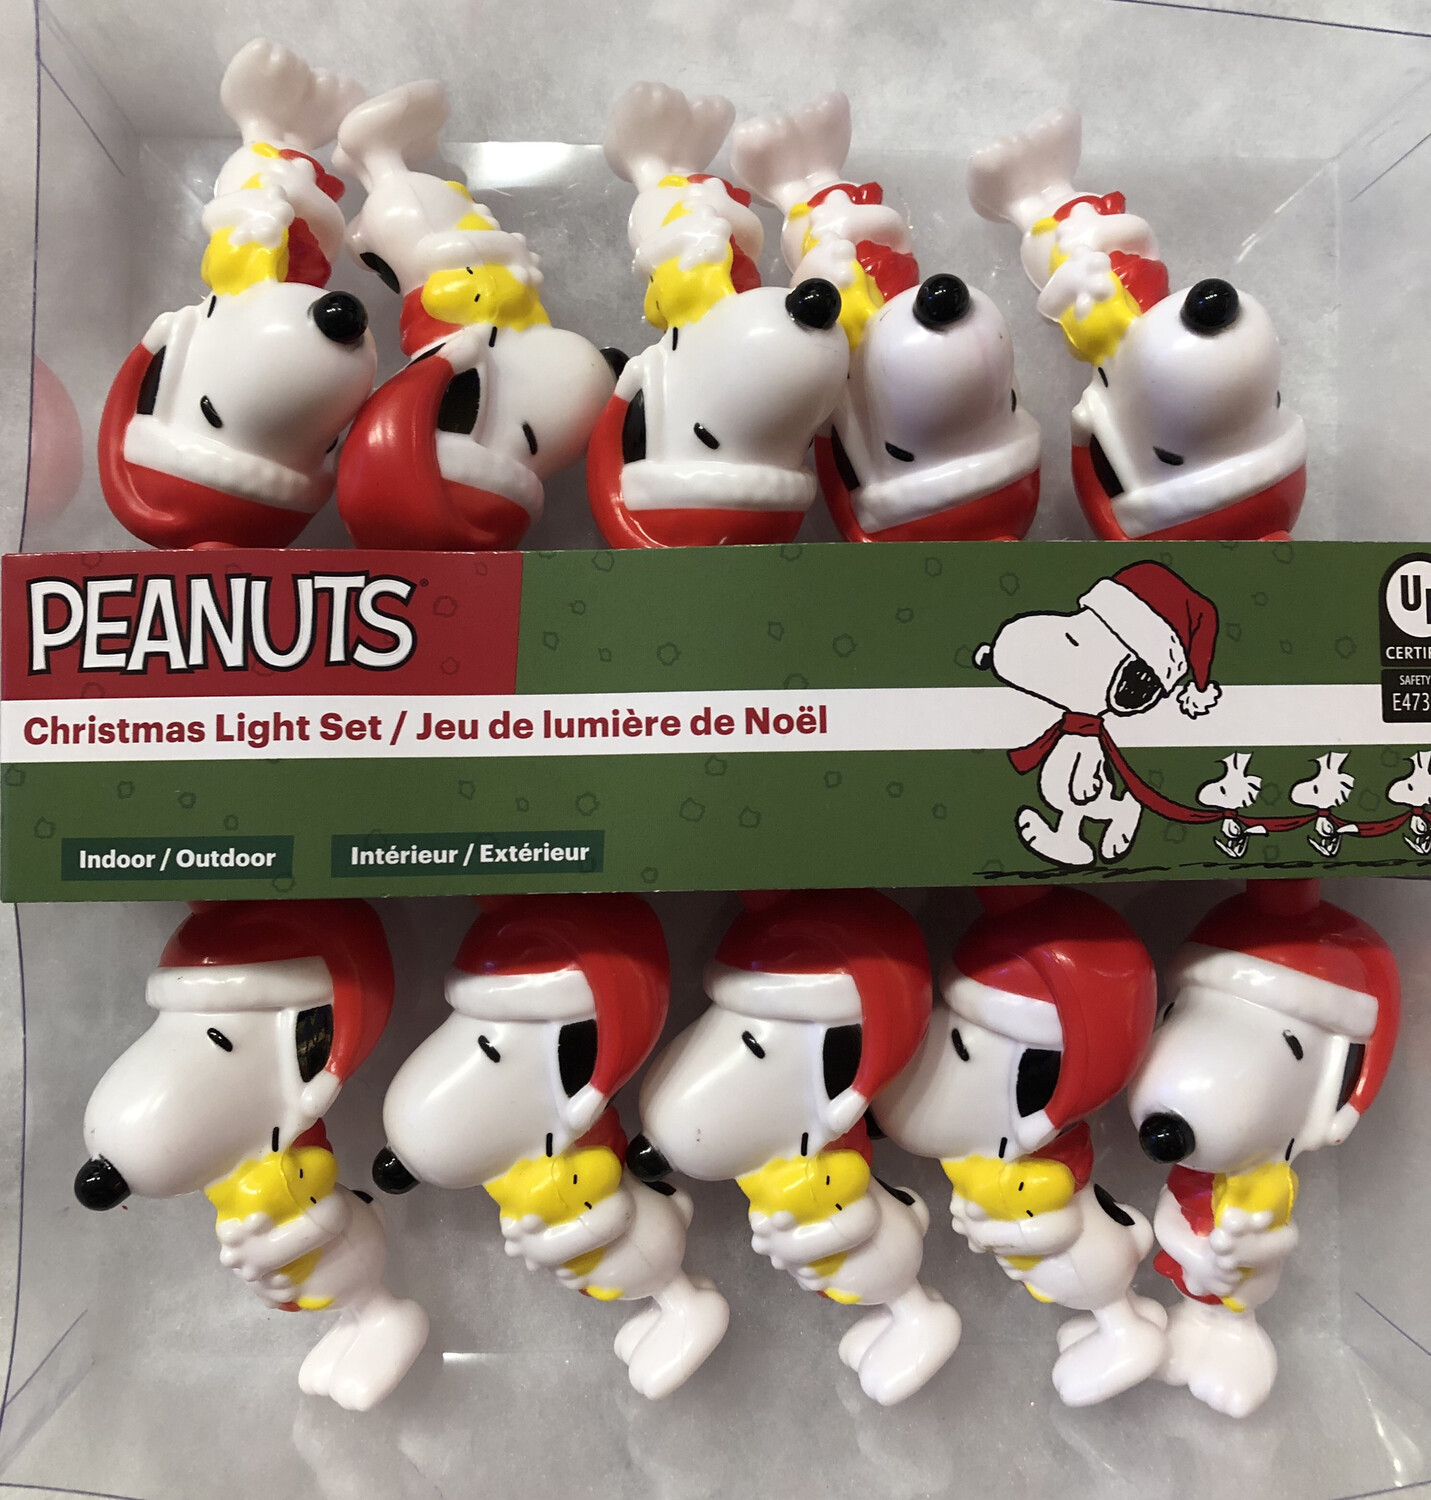 Snoopy with Woodstock Light Set